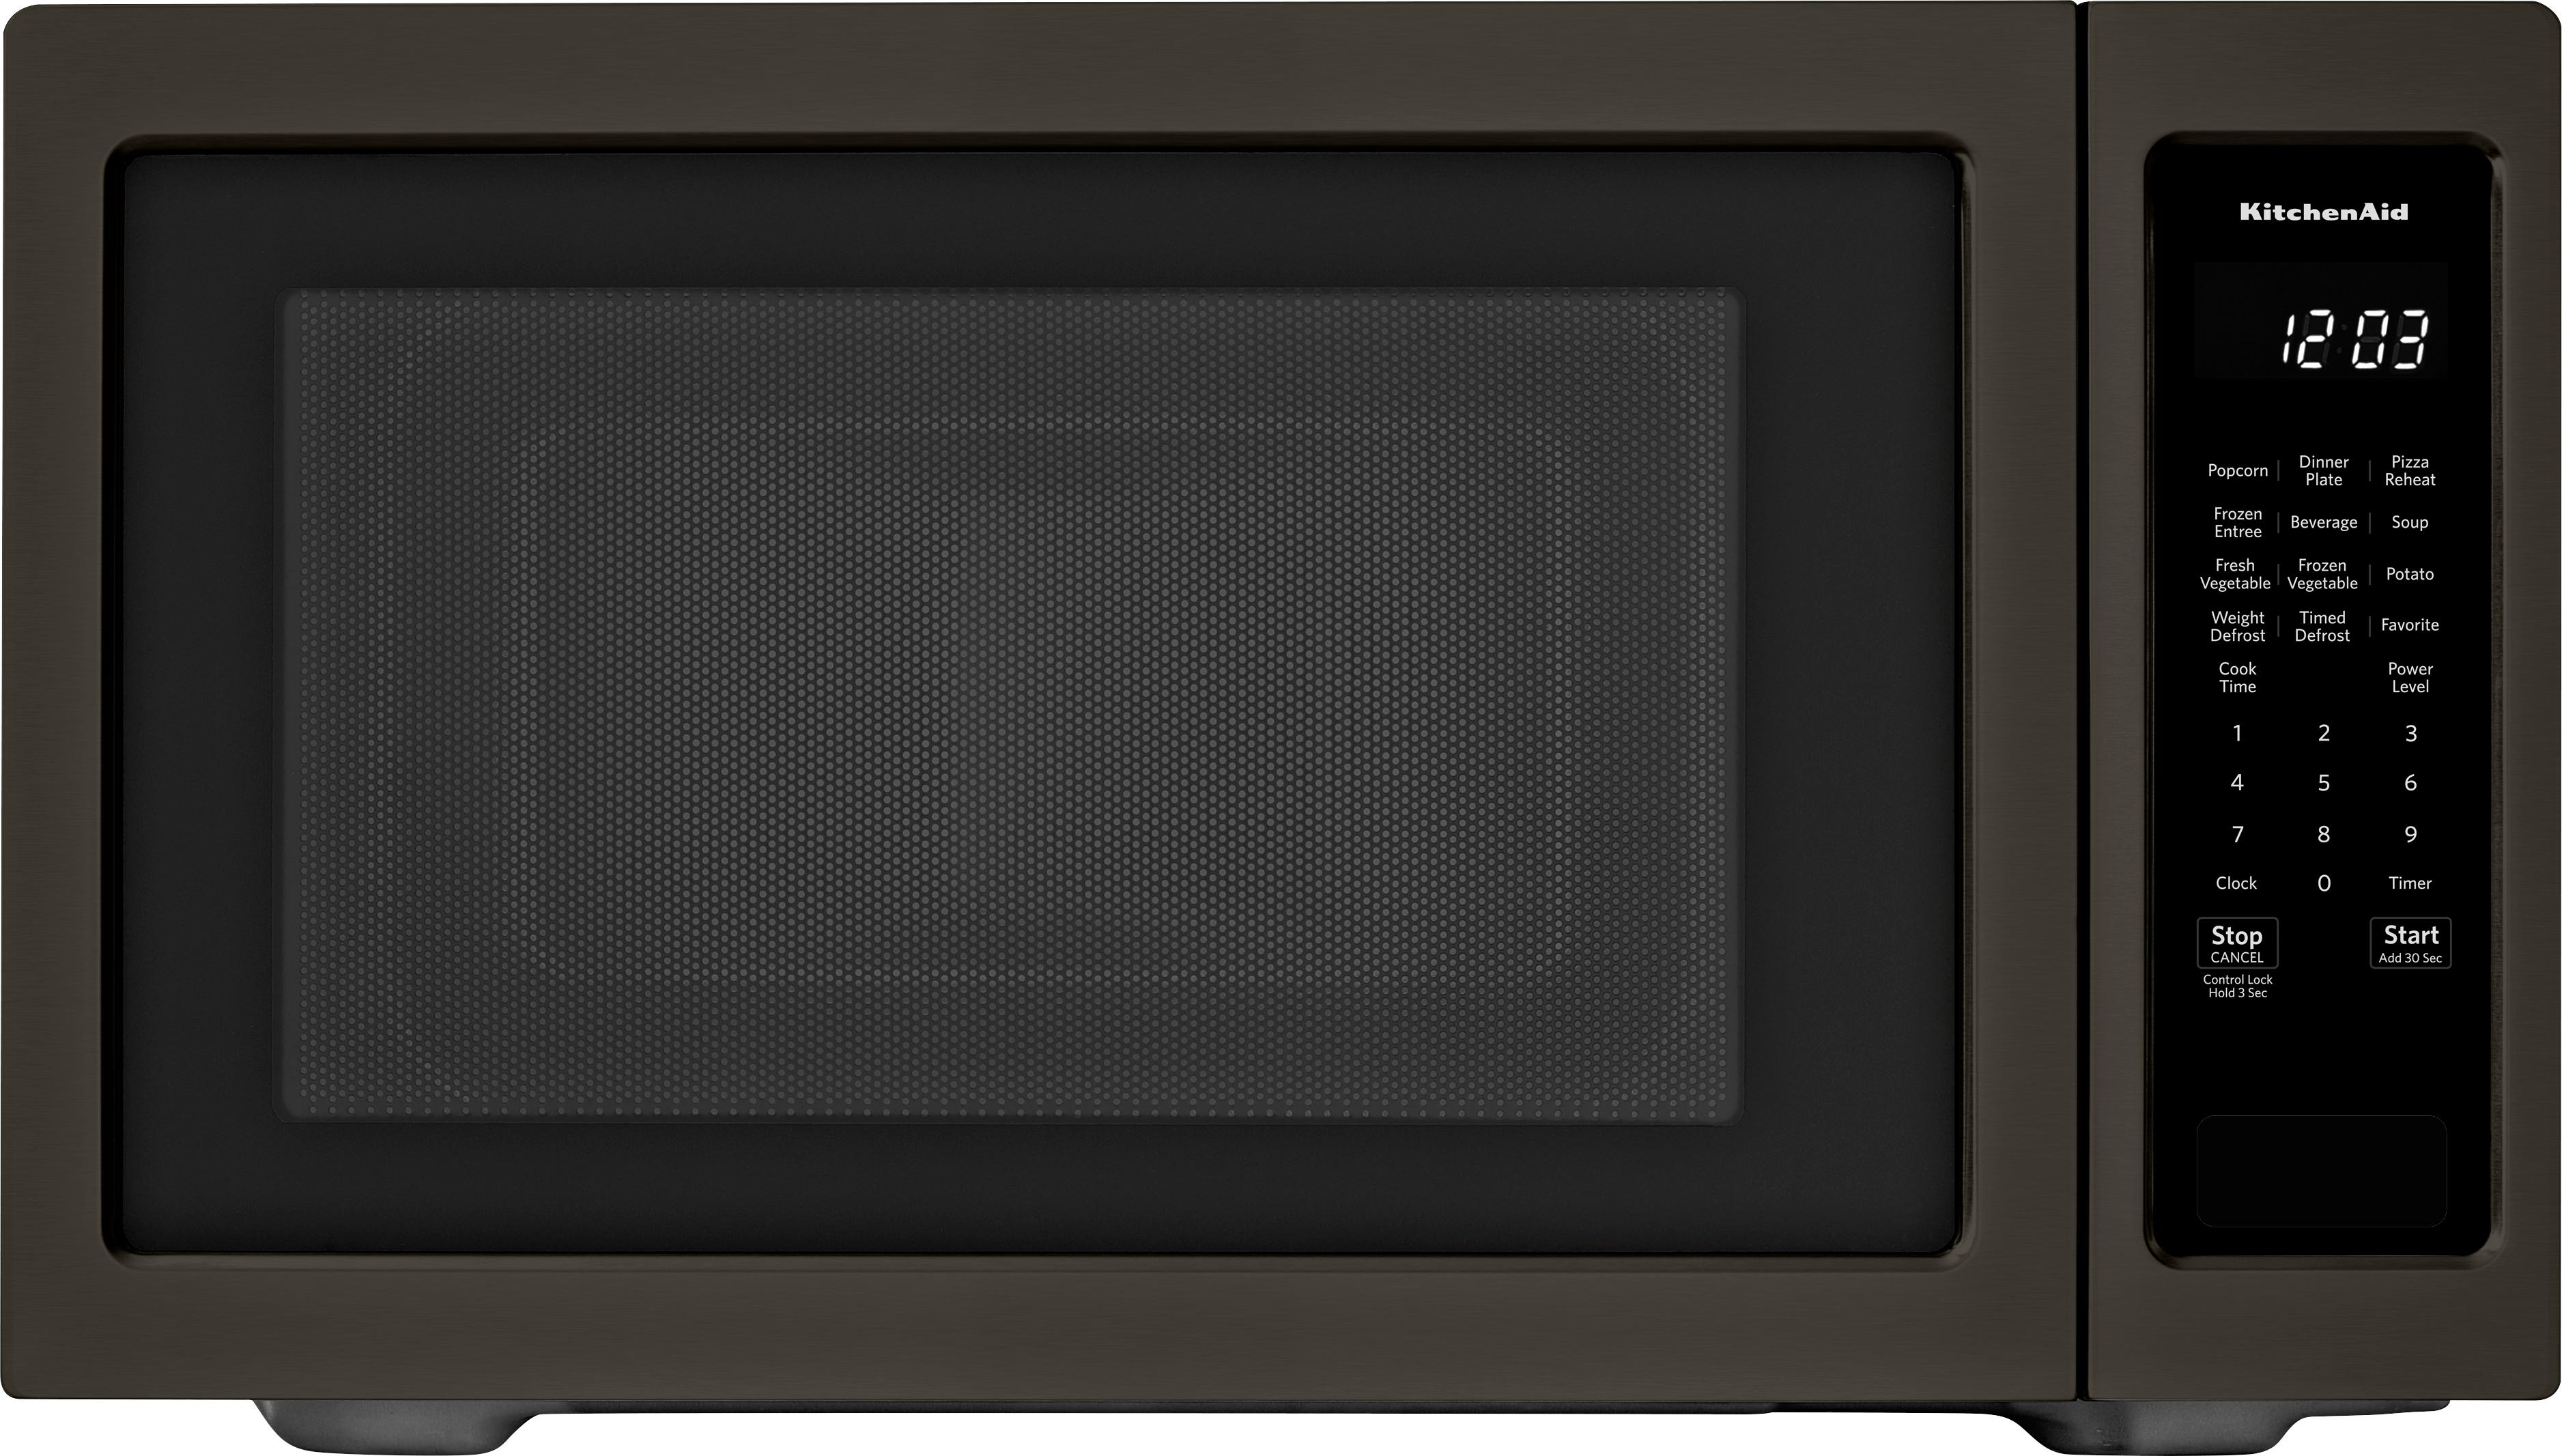 KitchenAid – 2.2 Cu. Ft. Microwave with Sensor Cooking – Black stainless steel